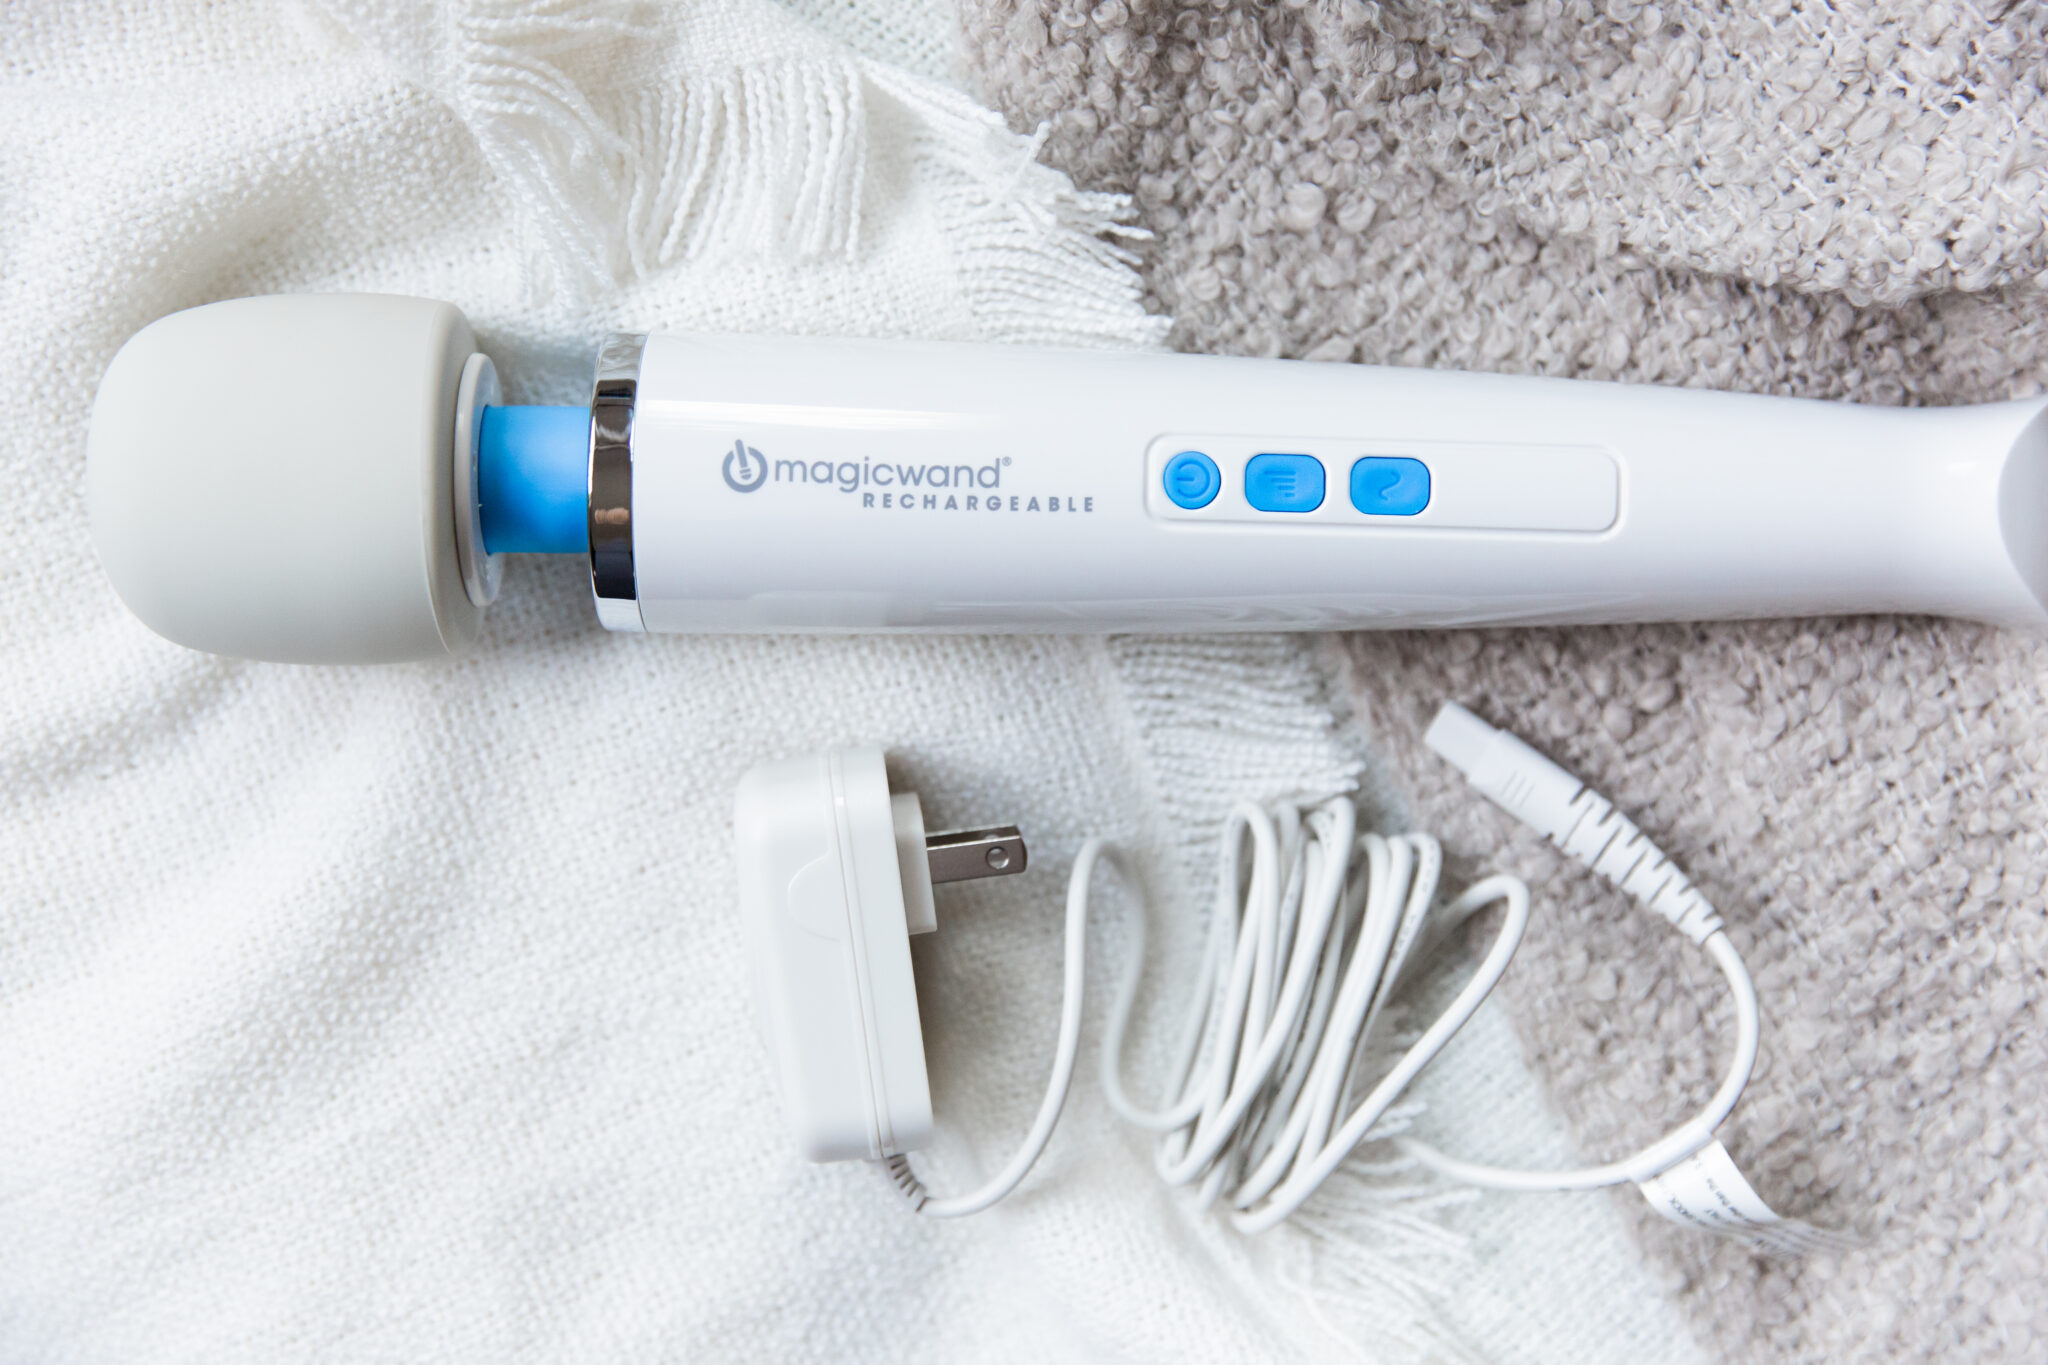 The Magic Wand Rechargeable looks just like its iconic sister, the Original, with its long, white body, rounded head, and blue accents.